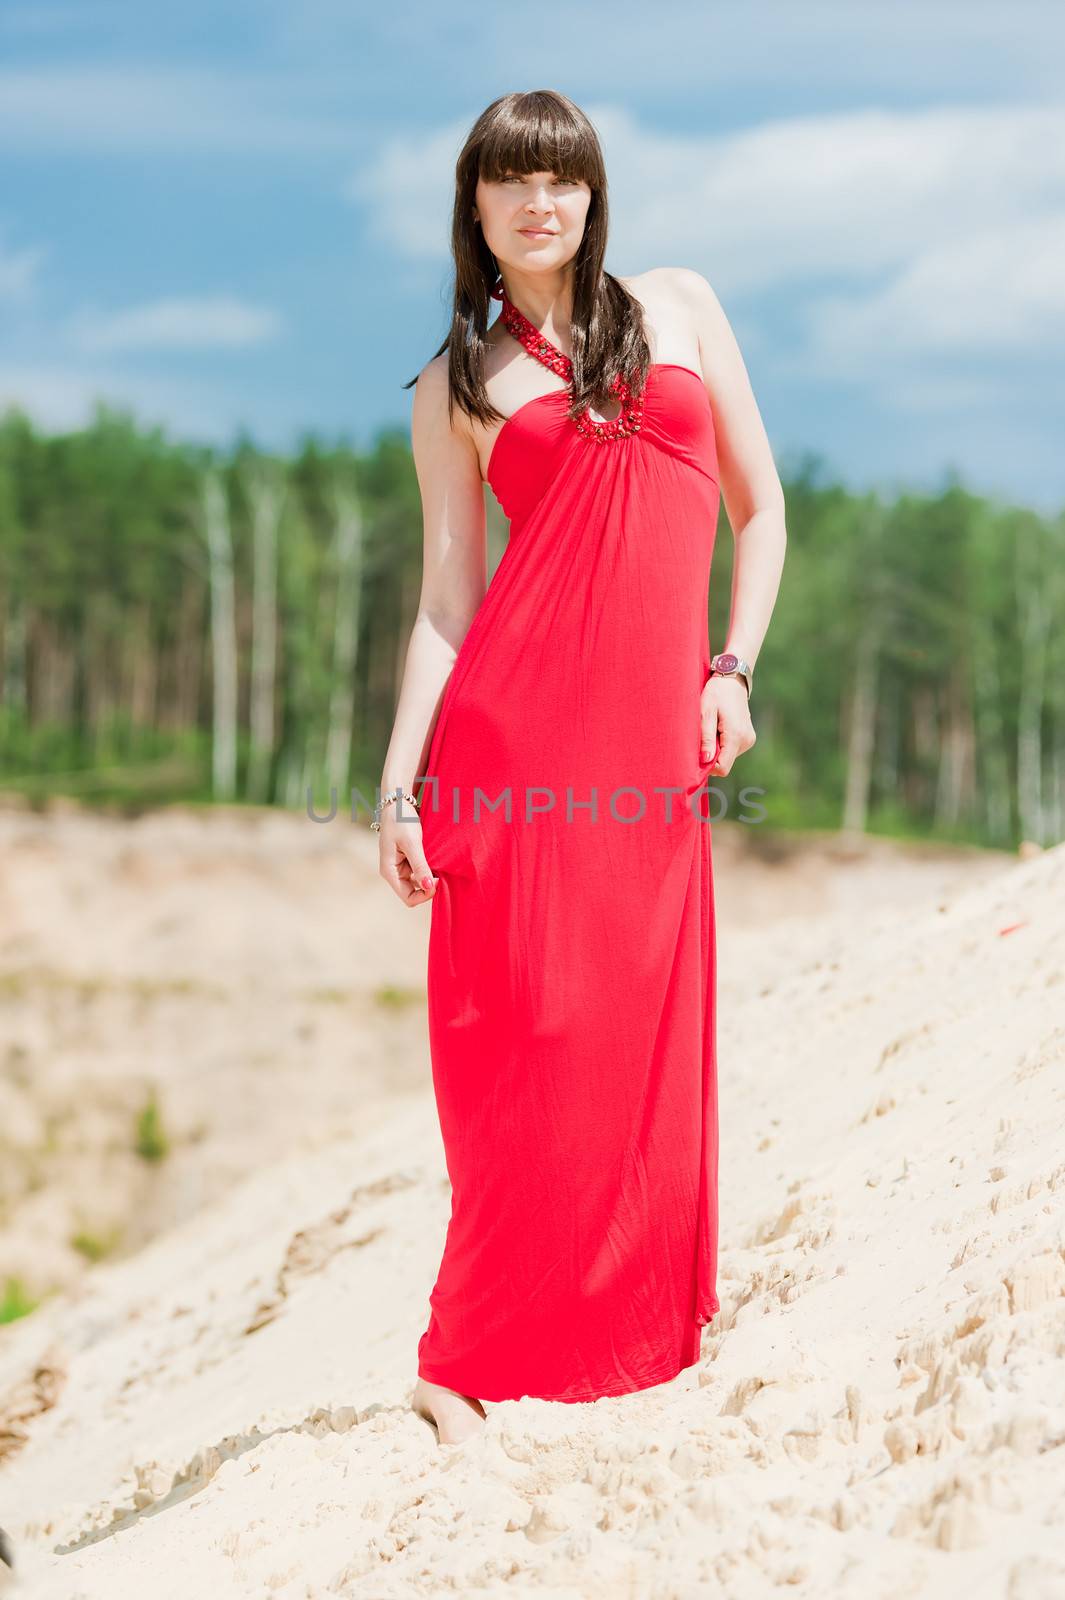 A girl in a red dress posing on a sand dune by kosmsos111